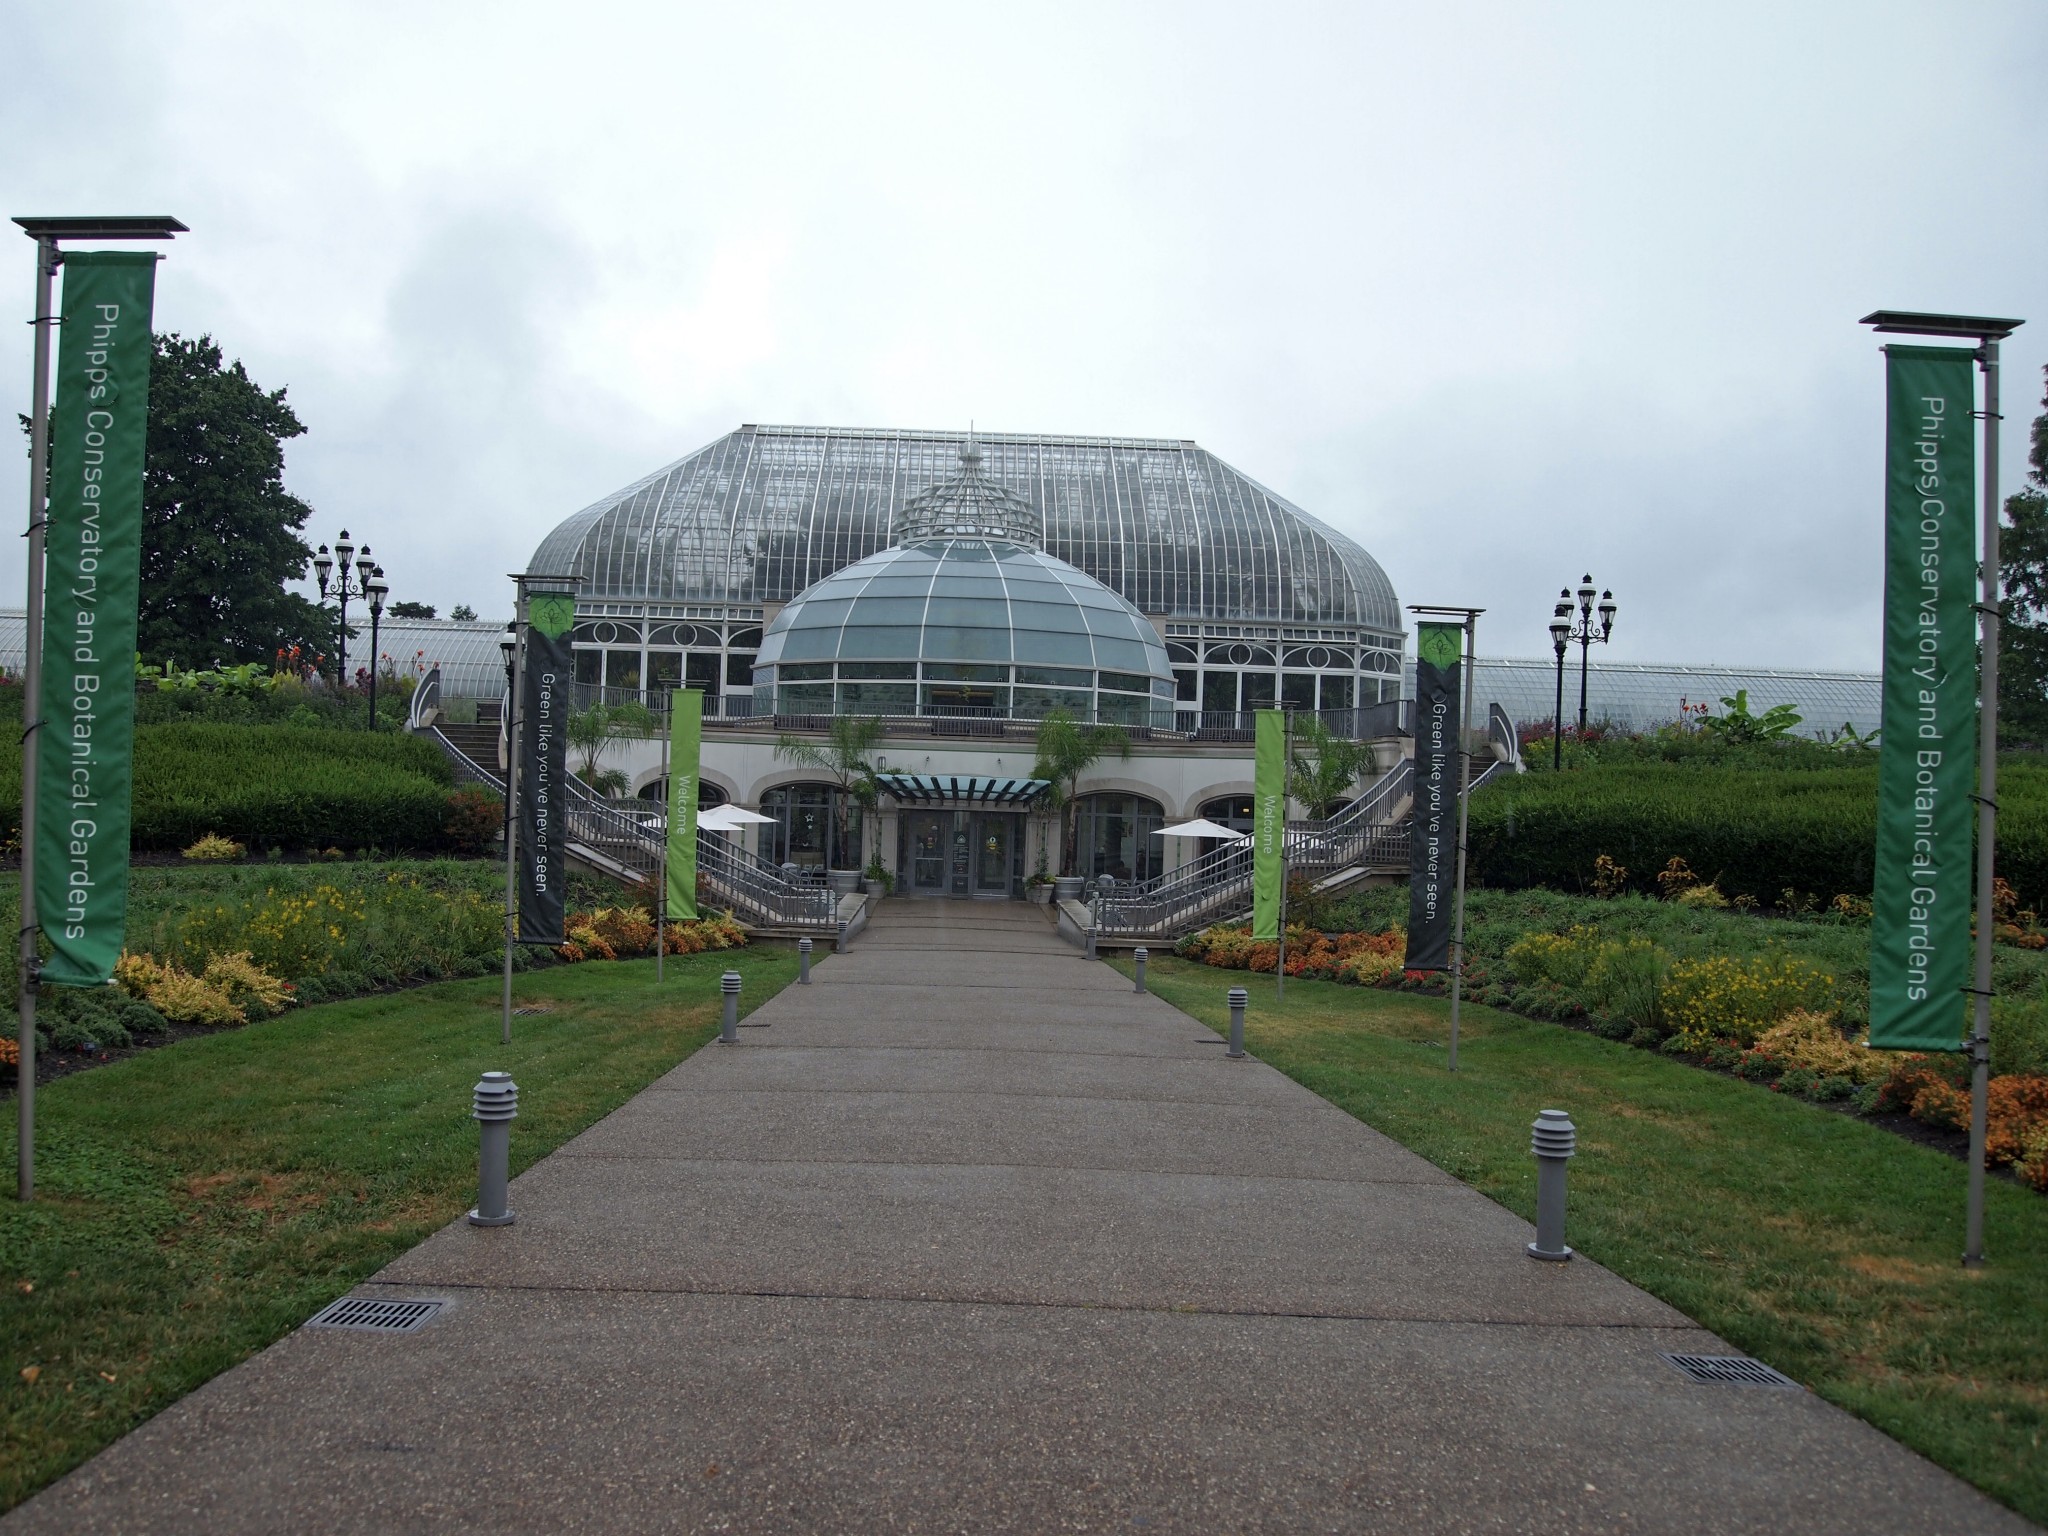 Phipps Conservatory: City Spotlight on Pittsburgh’s Green Side